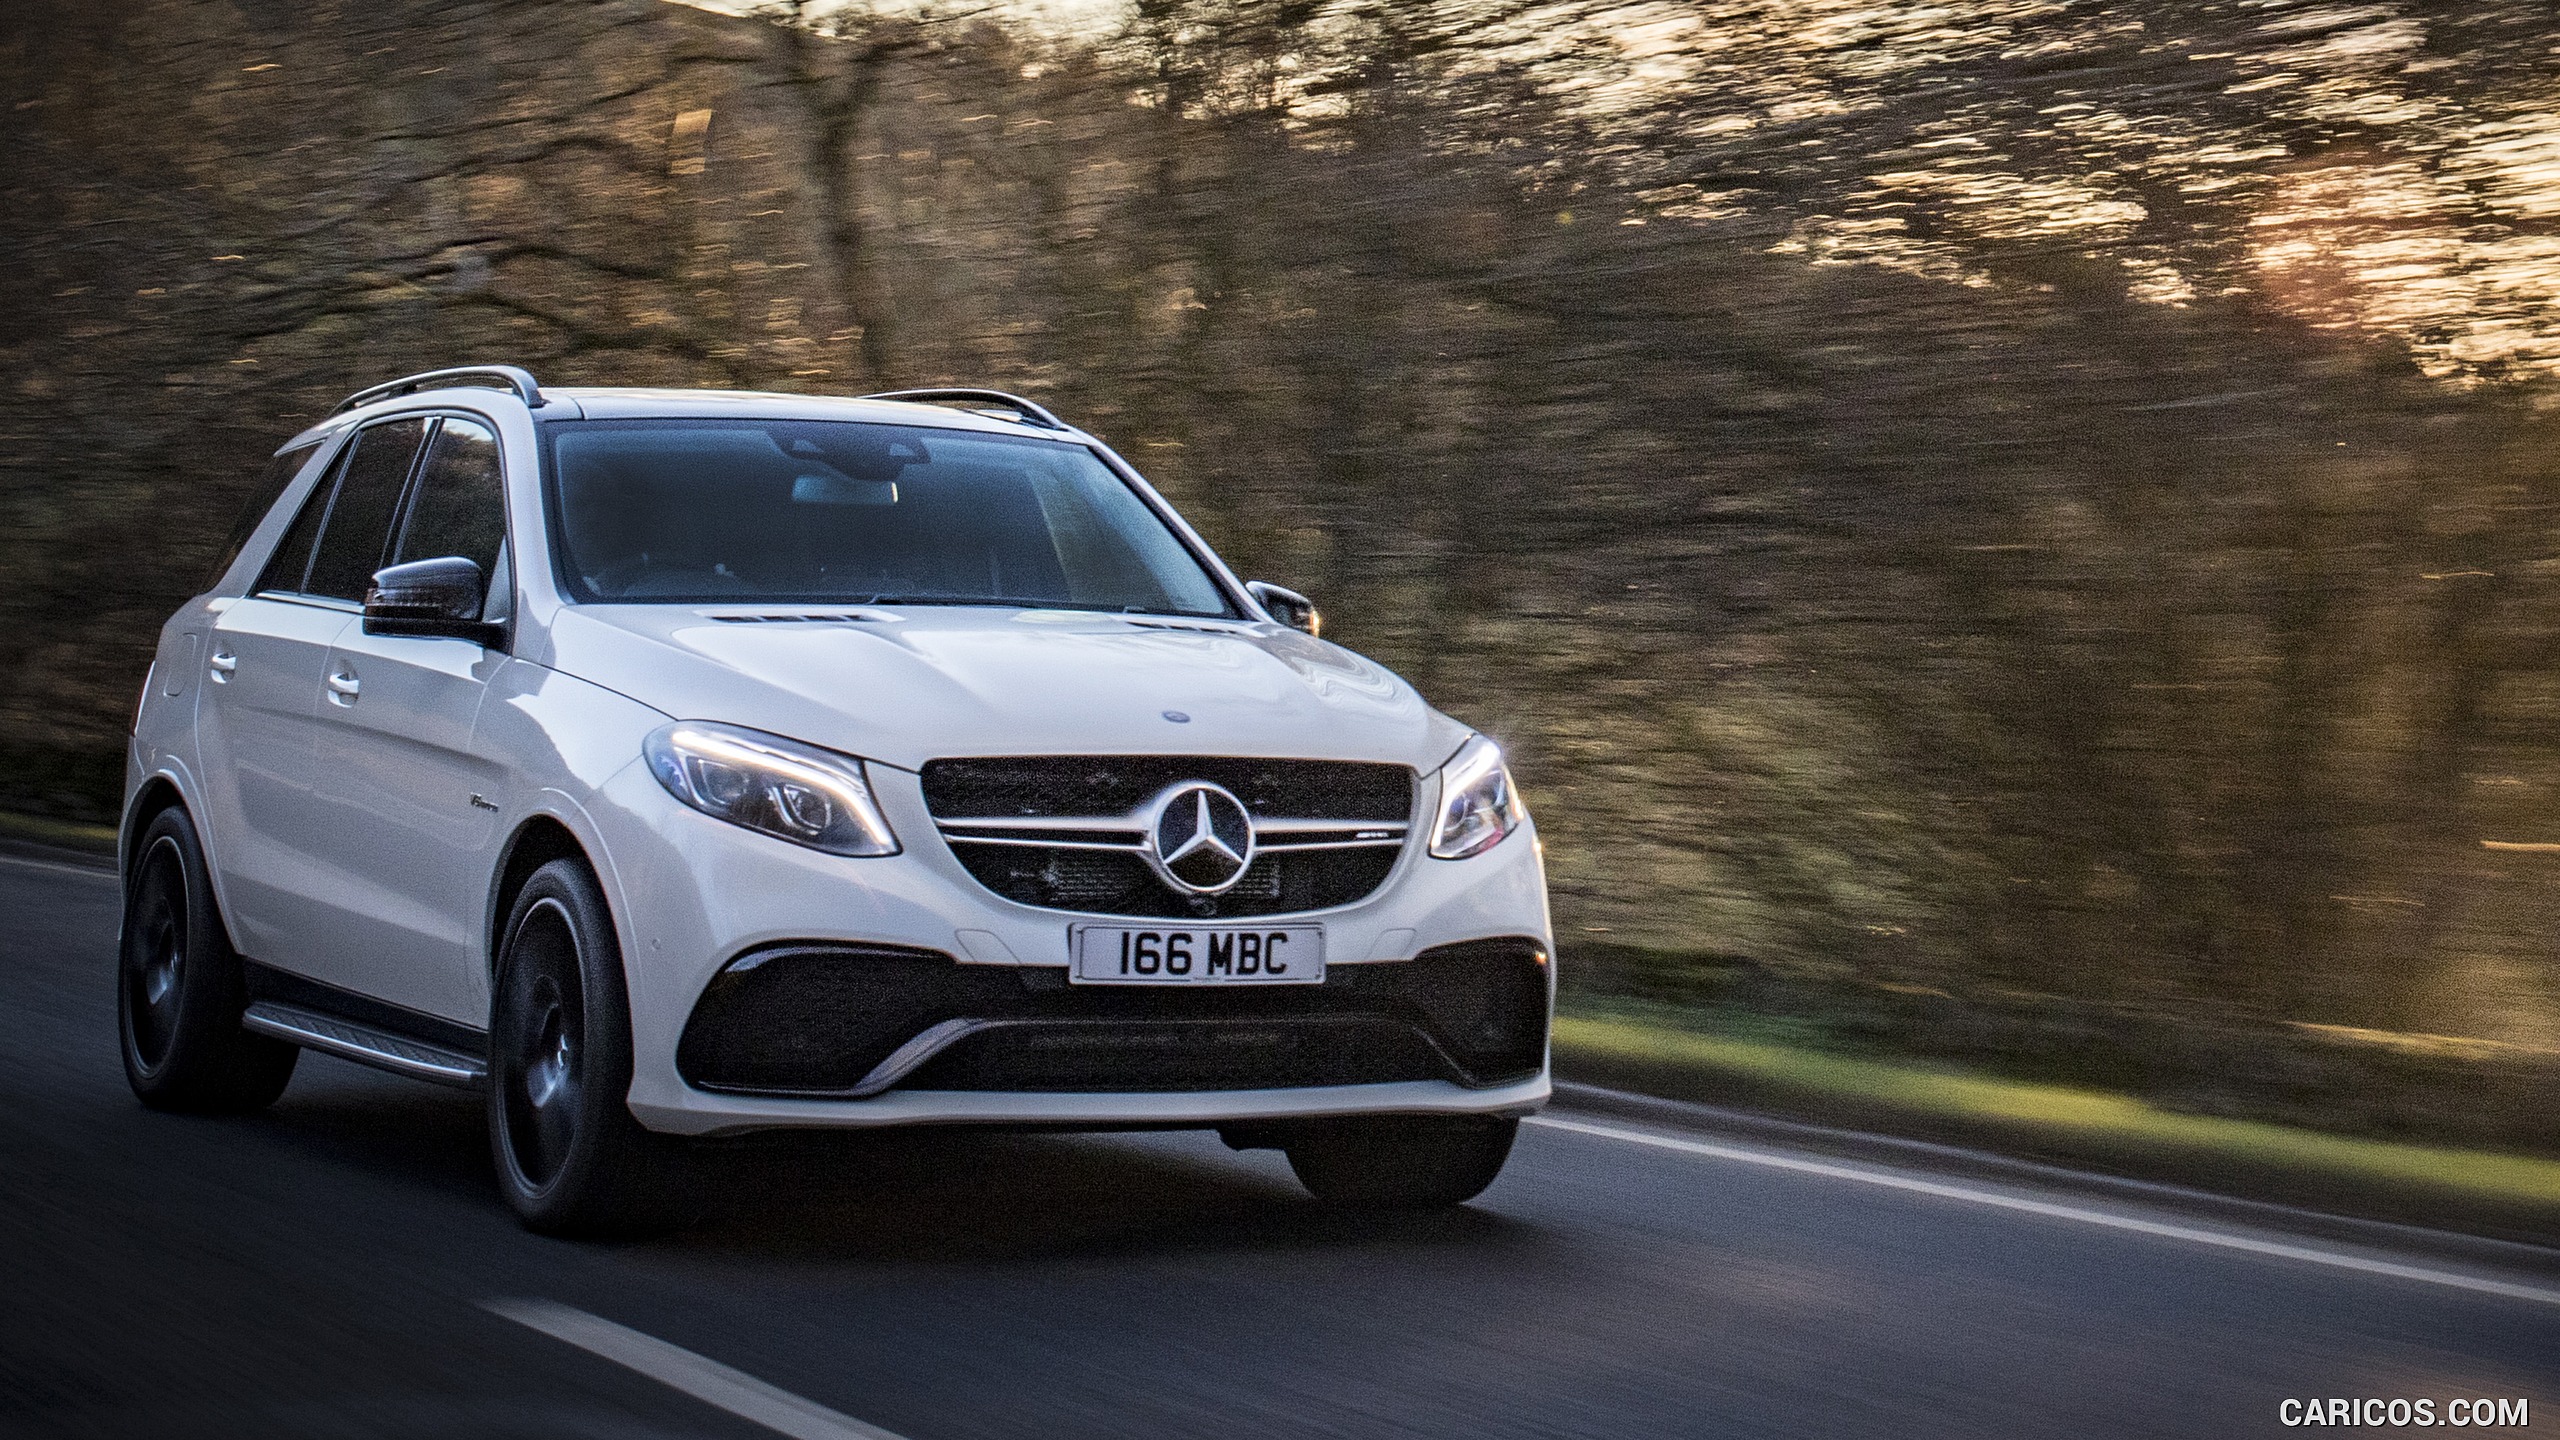 2016 Mercedes-AMG GLE 63 S (UK-Spec) - Front, #39 of 68